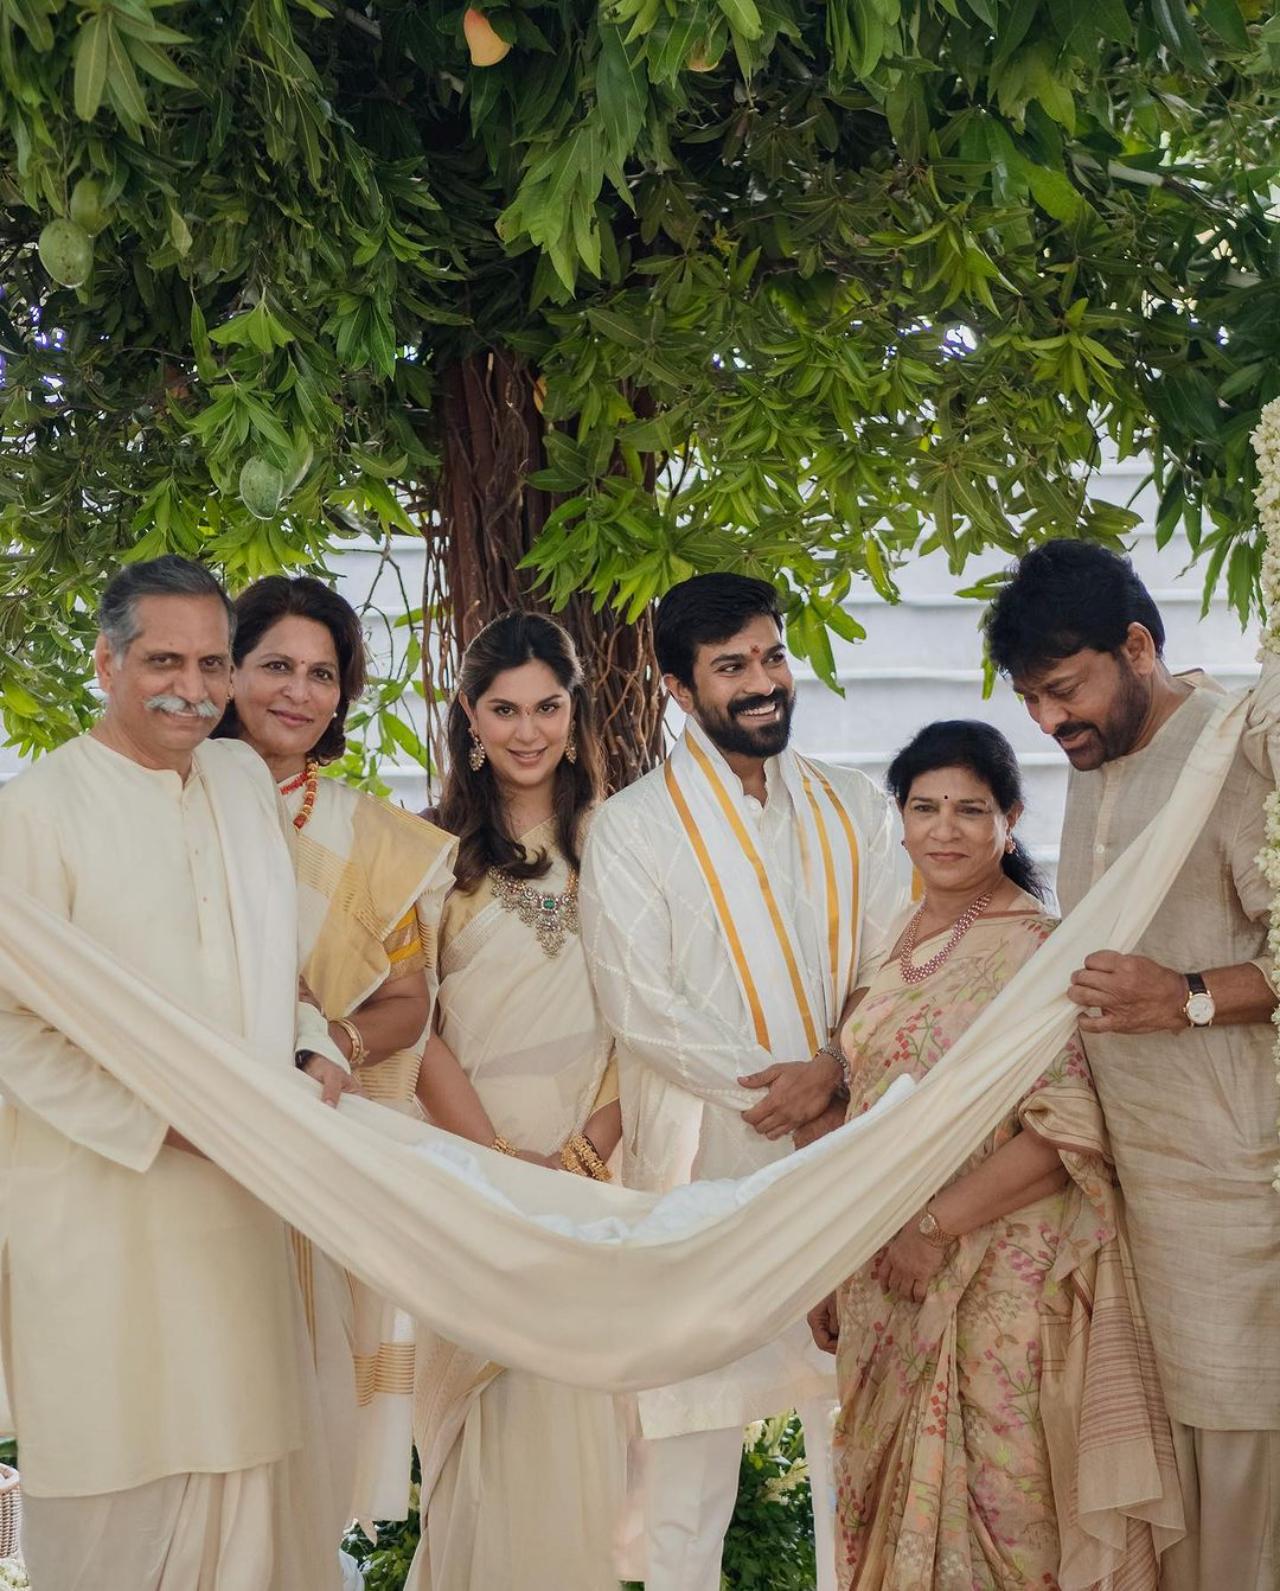 The RRR actor also shared a few photos from the ceremony. The entire family was elegantly dressed in traditional colours of white and gold. They stood behind the cradle adorned with jasmine flowers